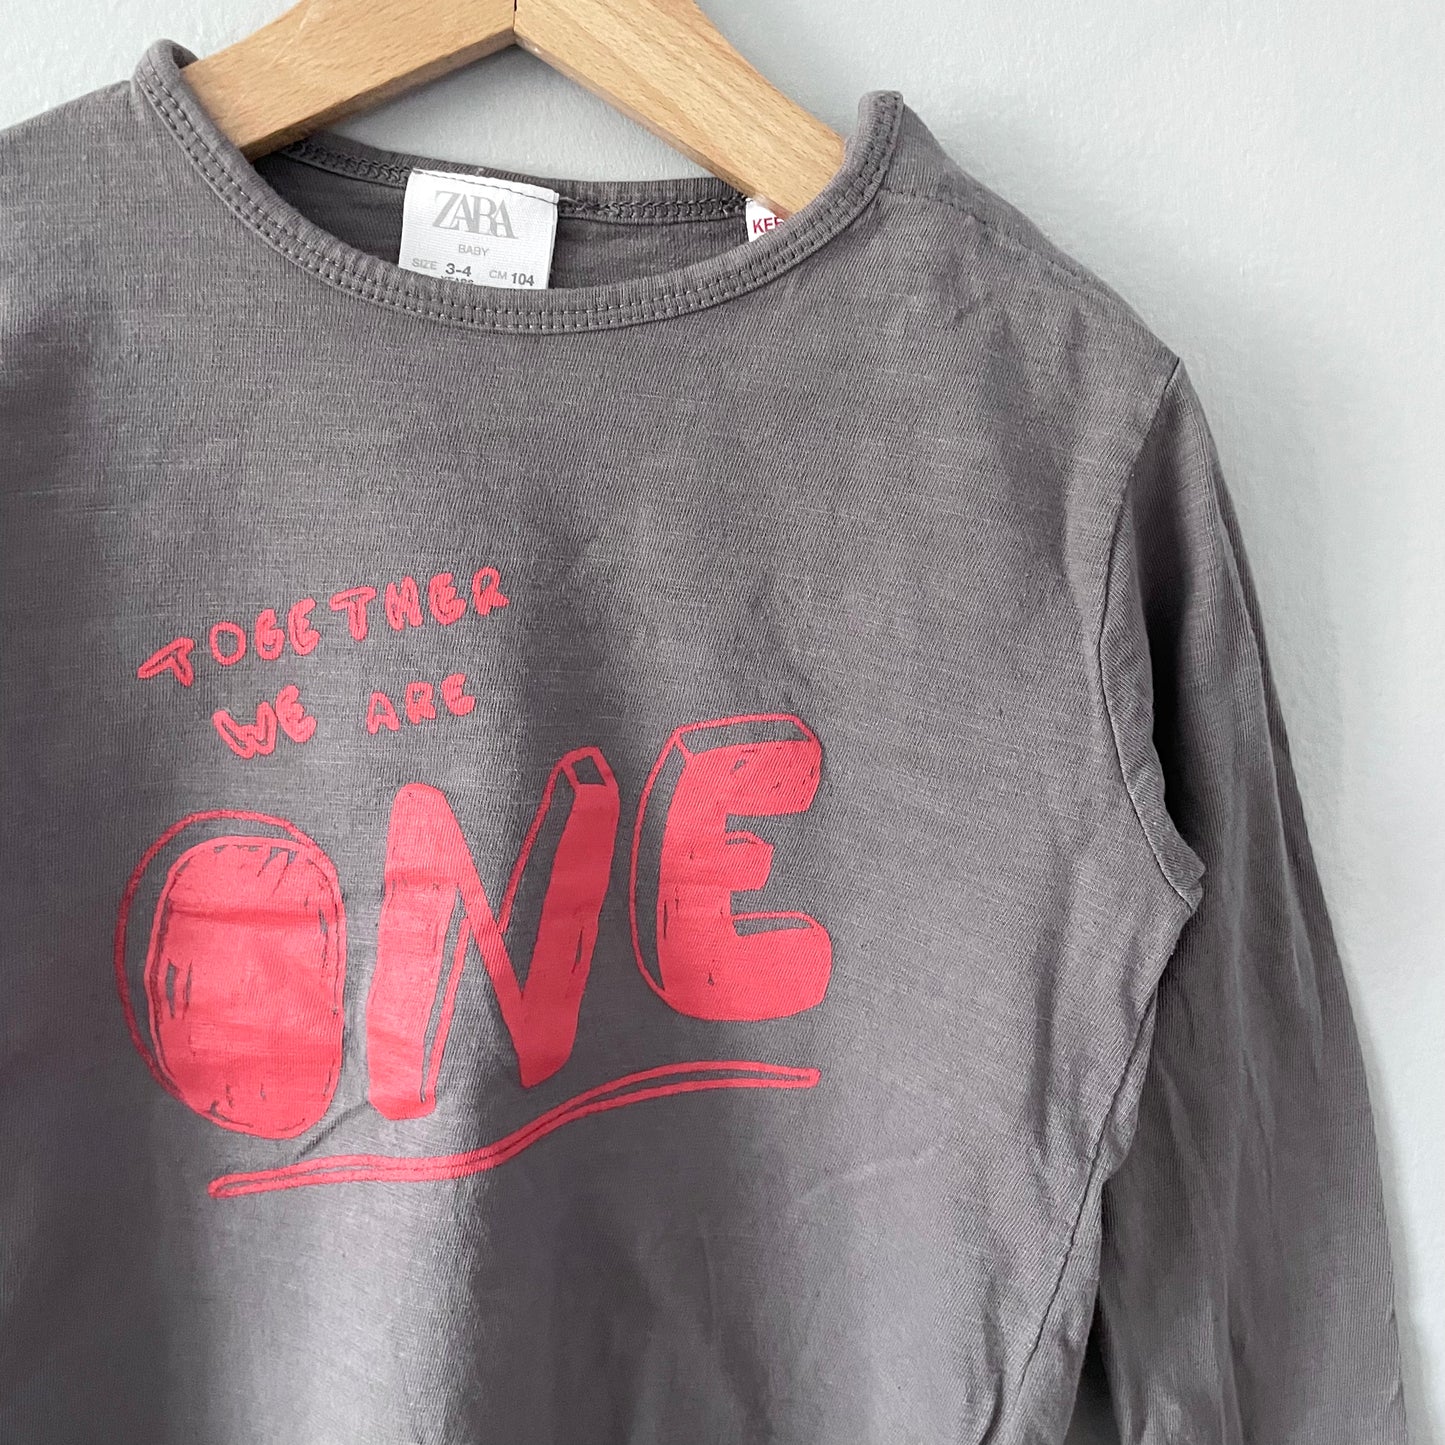 Zara / Together we are one T-shirt / 3-4Y